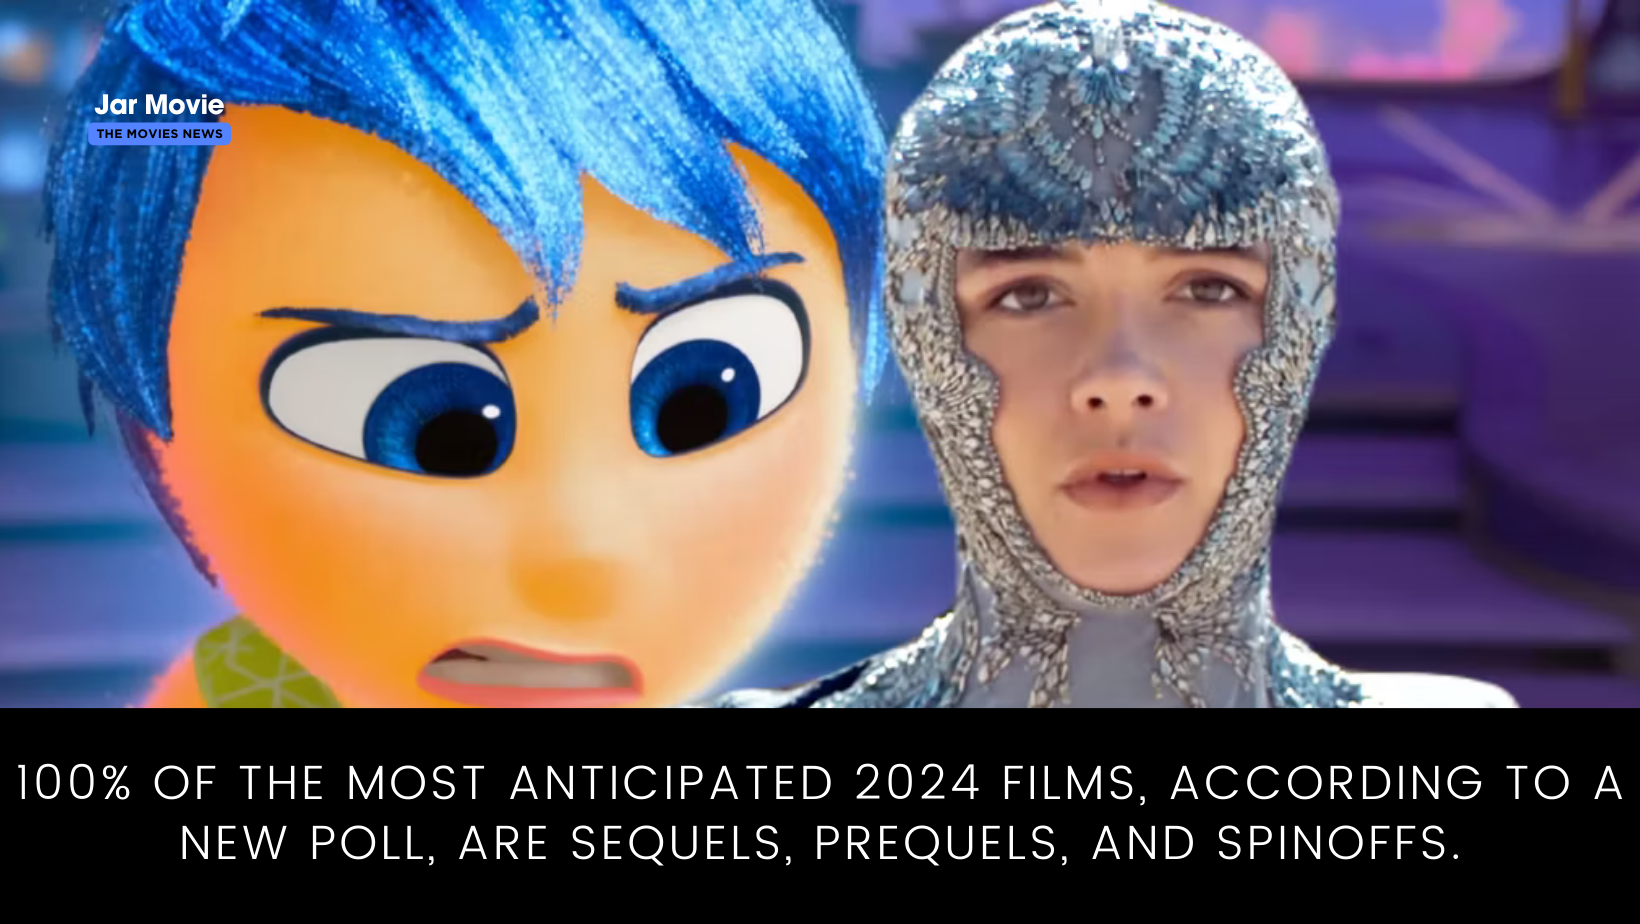 100% of the most anticipated 2024 films, according to a new poll, are sequels, prequels, and spinoffs.